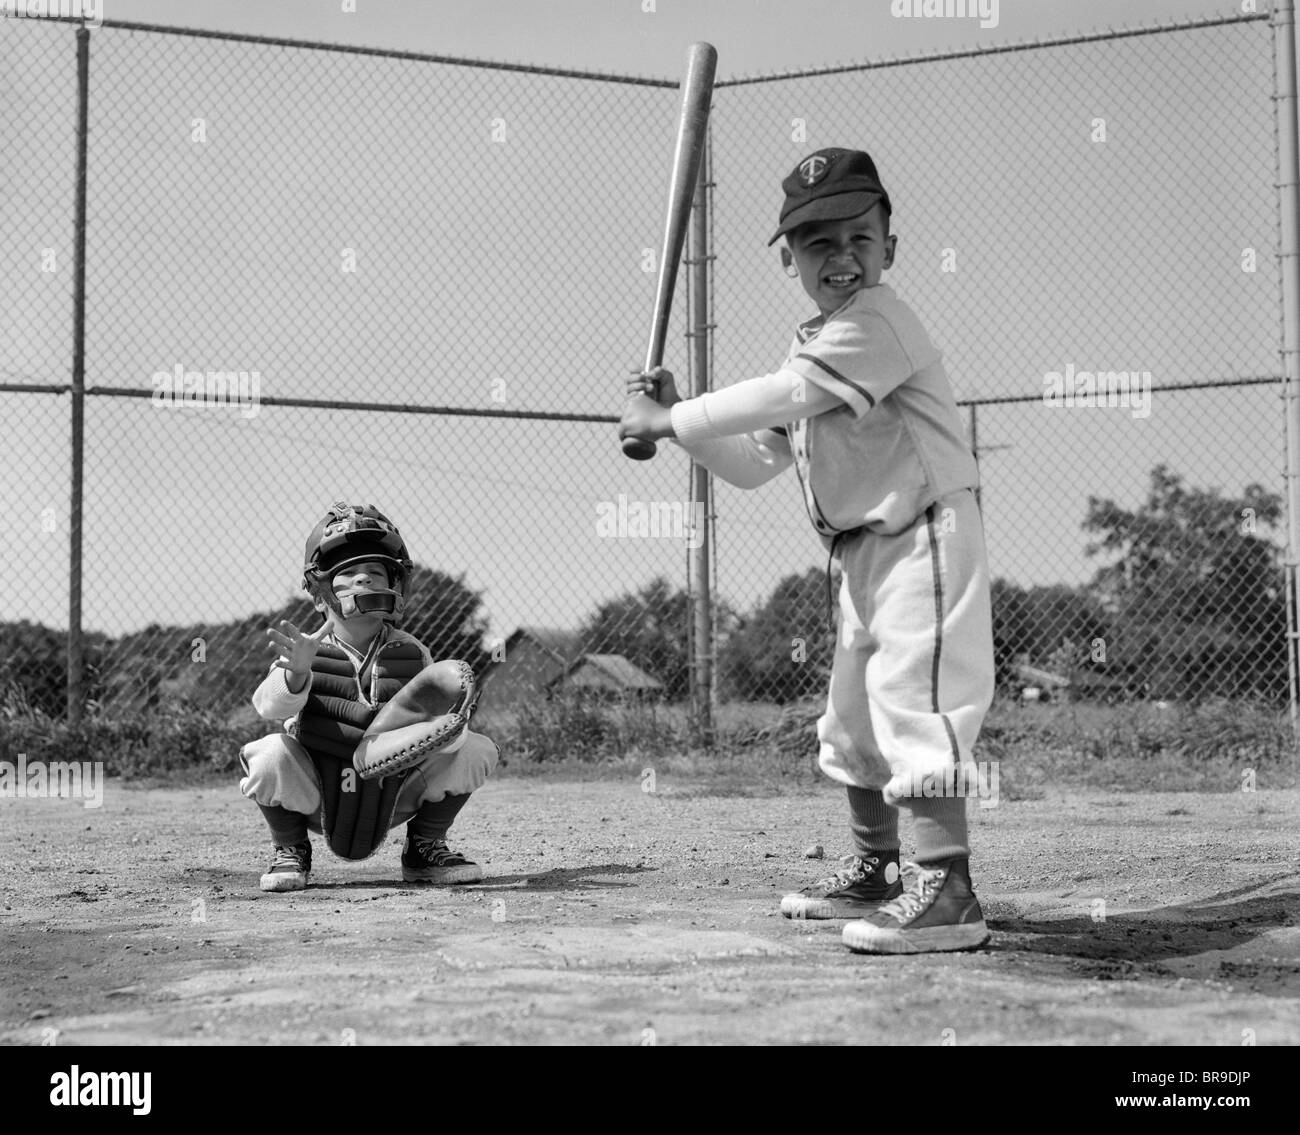 1960s TWO BOYS PLAYING BASEBALL BATTER AND CATCHER AT HOME PLATE Stock Photo